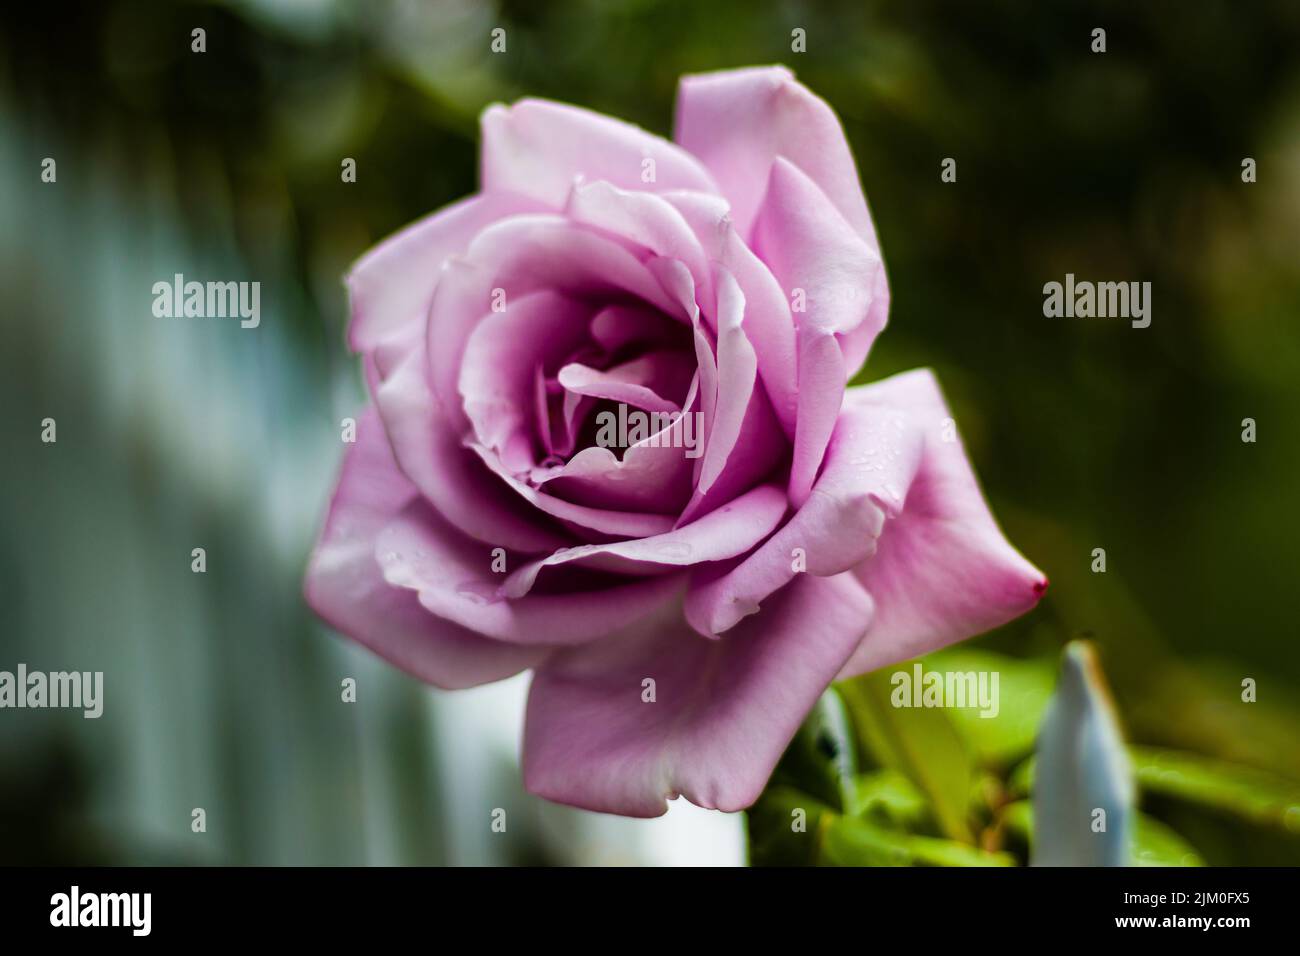 A closeup shot detail of a pink blossom Rosa 'Mainzer Fastnacht flower with blurred green background Stock Photo